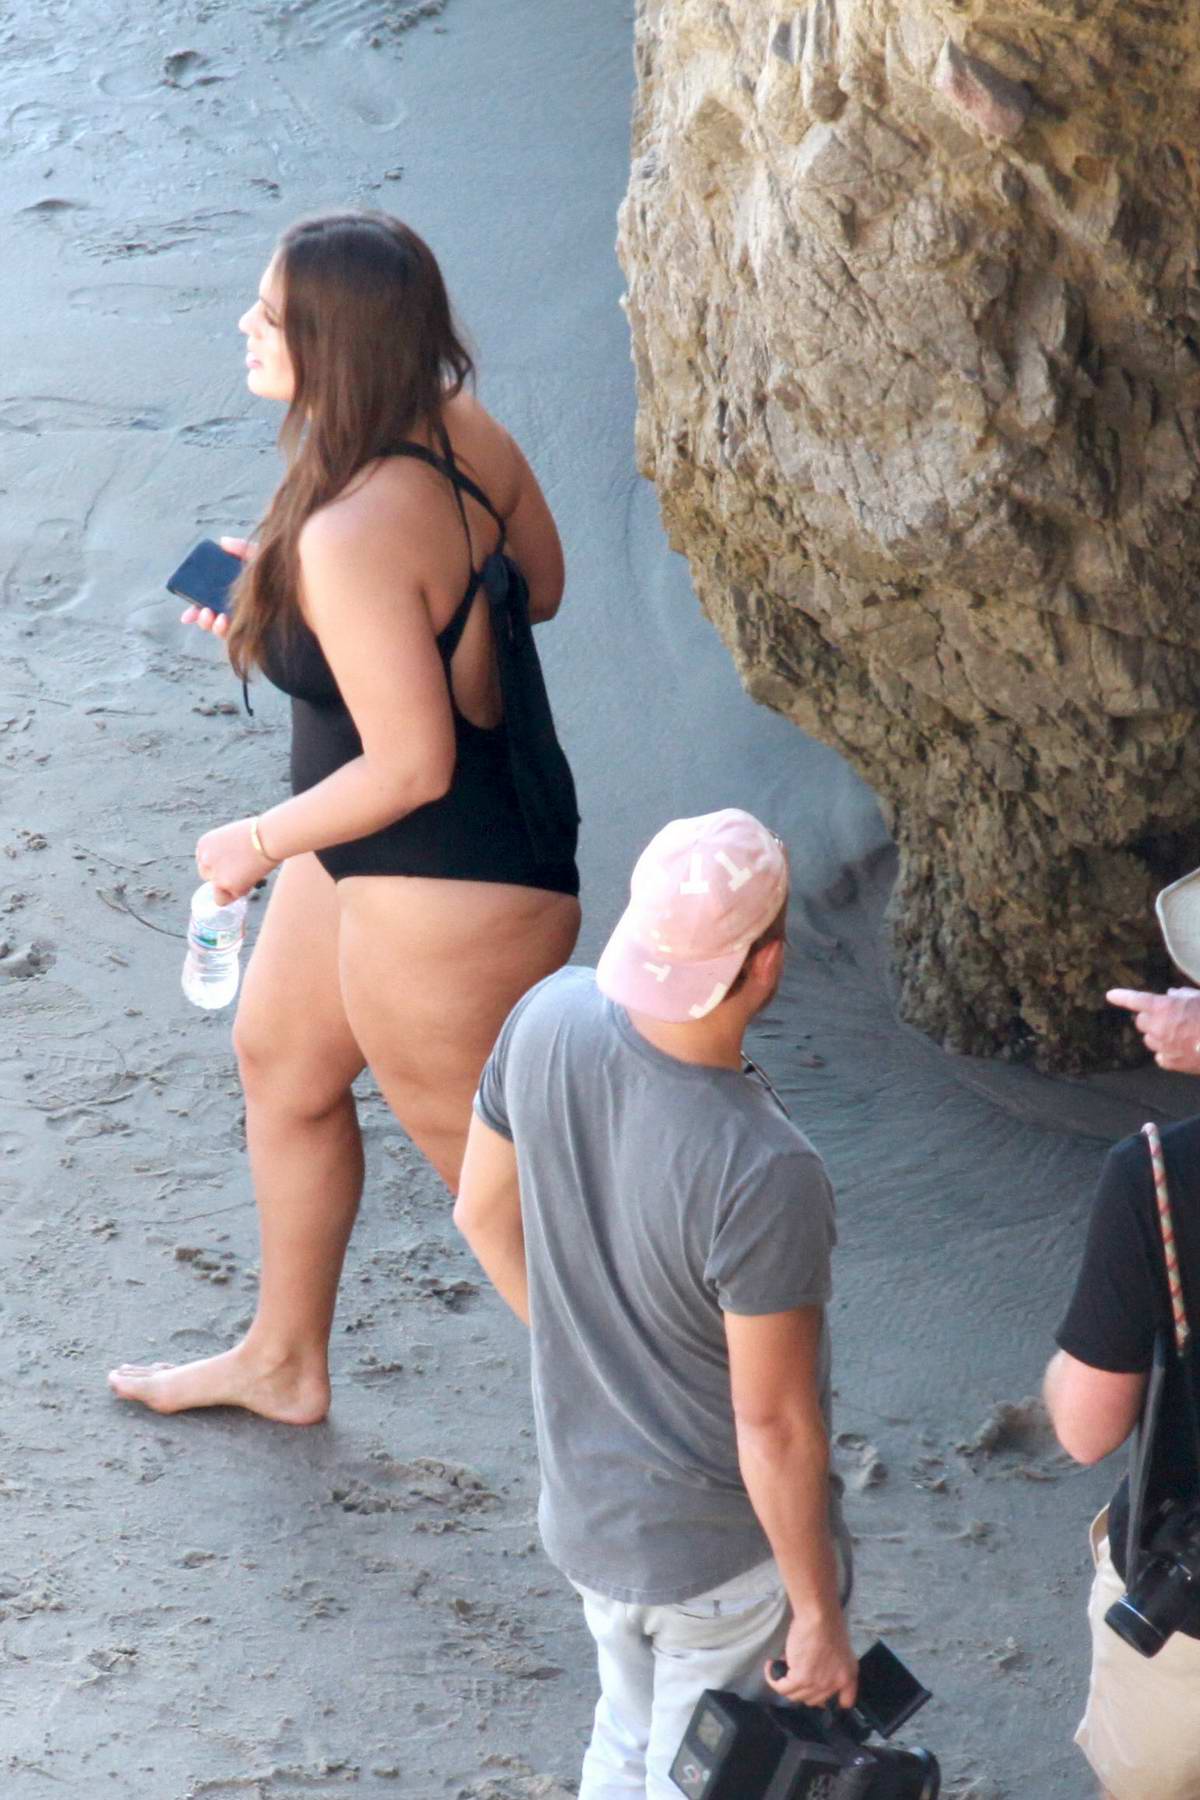 ashley graham seen wearing multiple swimsuits and bikini during her clothin...